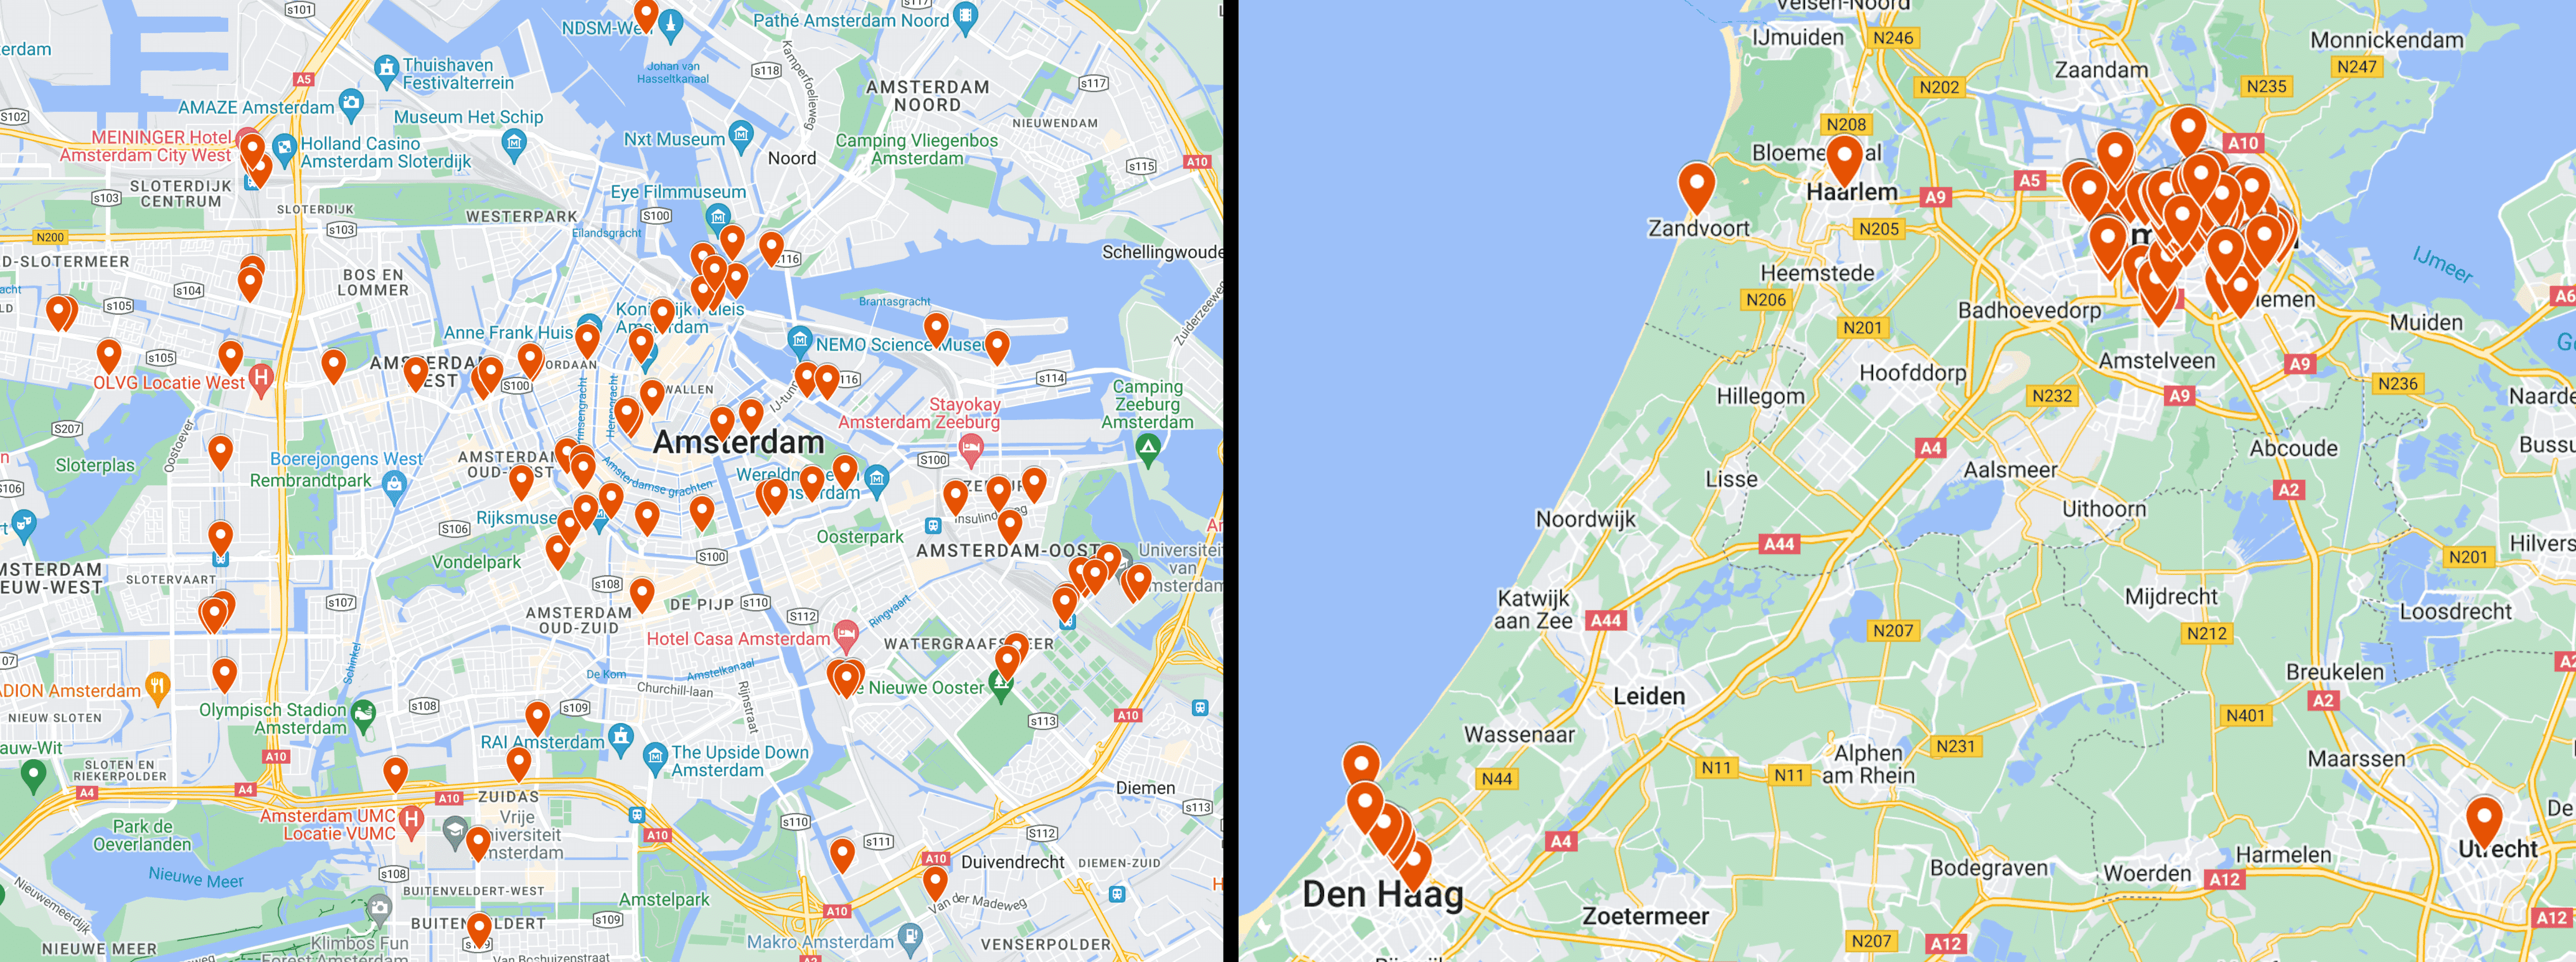 A map of every place I visited.